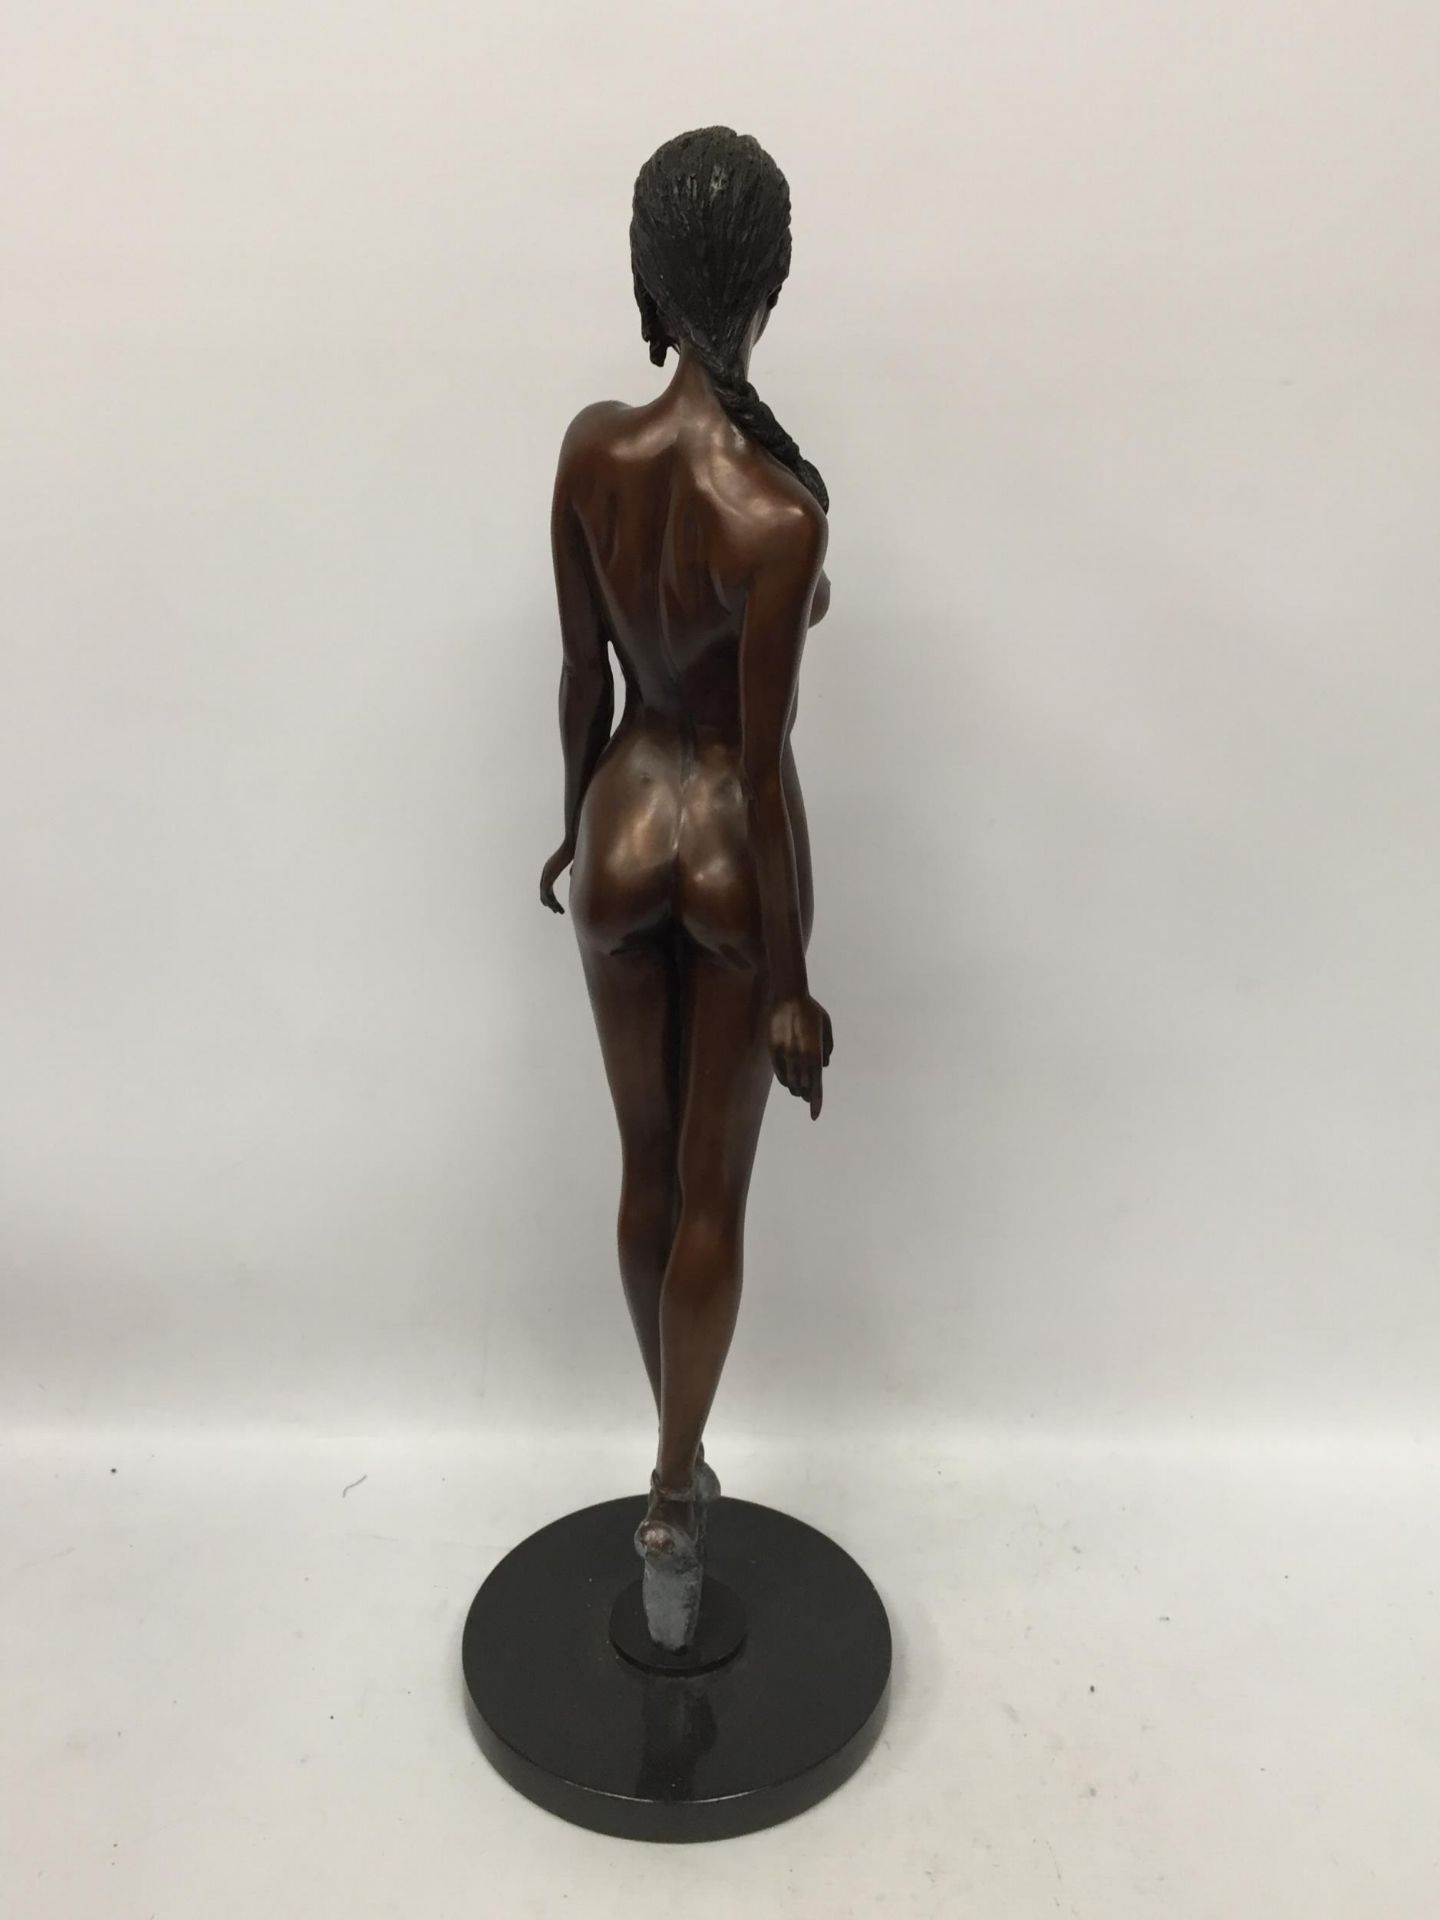 A BRONZE NUDE LADY BALLERINA FIGURE ON MARBLE BASE - Image 3 of 4